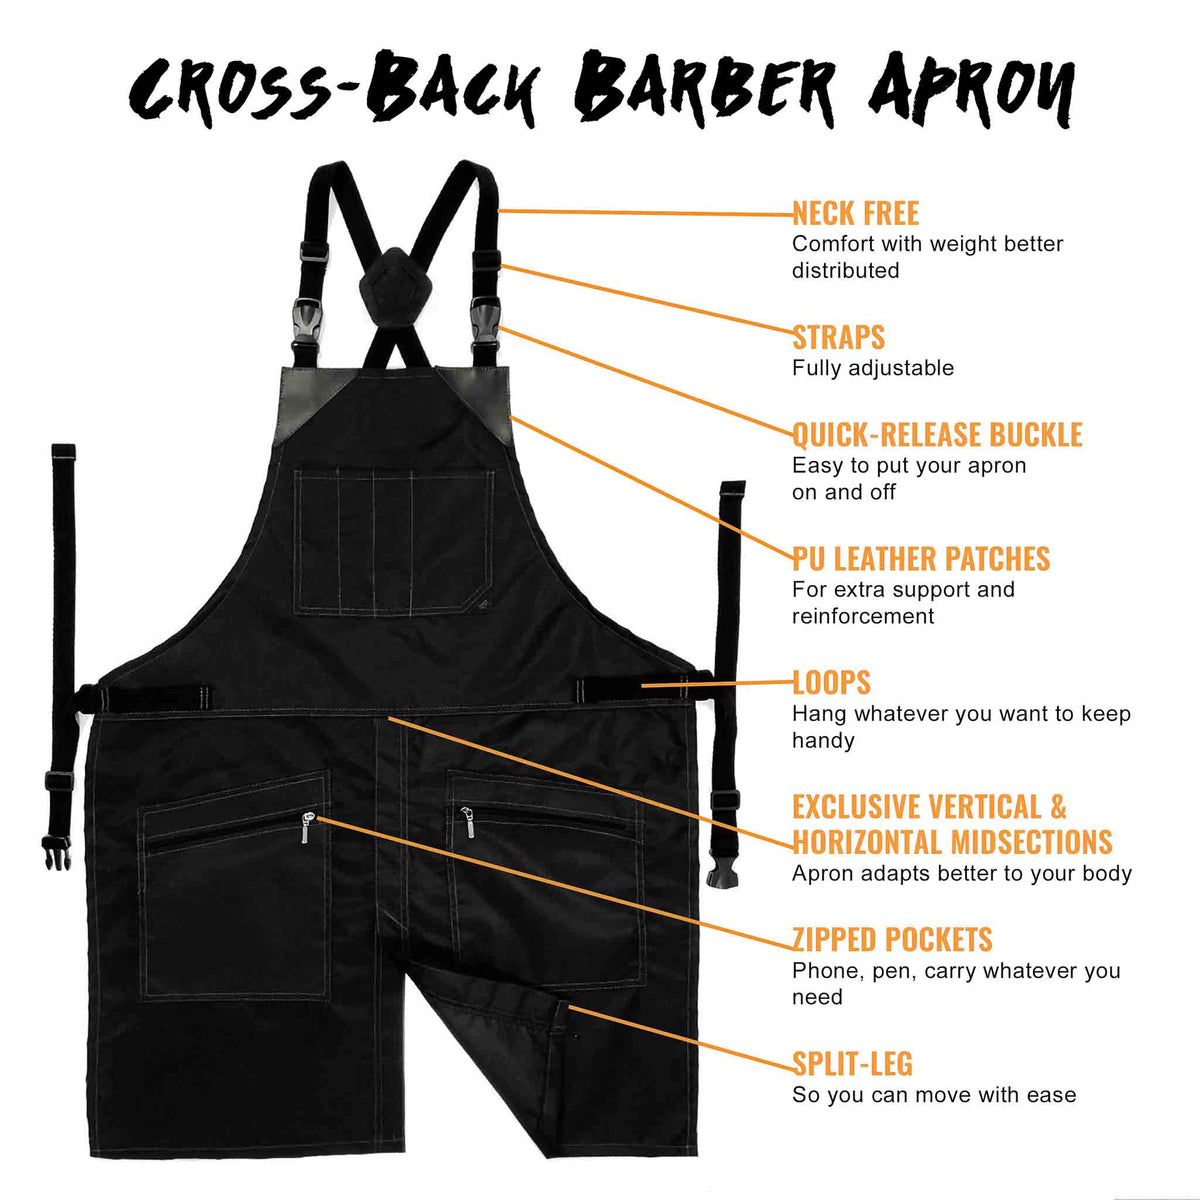 Barber Apron - Water &amp; Chemical Proof, CrossBack, Zip Pocket, Buckle Closure - Hairstylist, Colorist - Under NY Sky